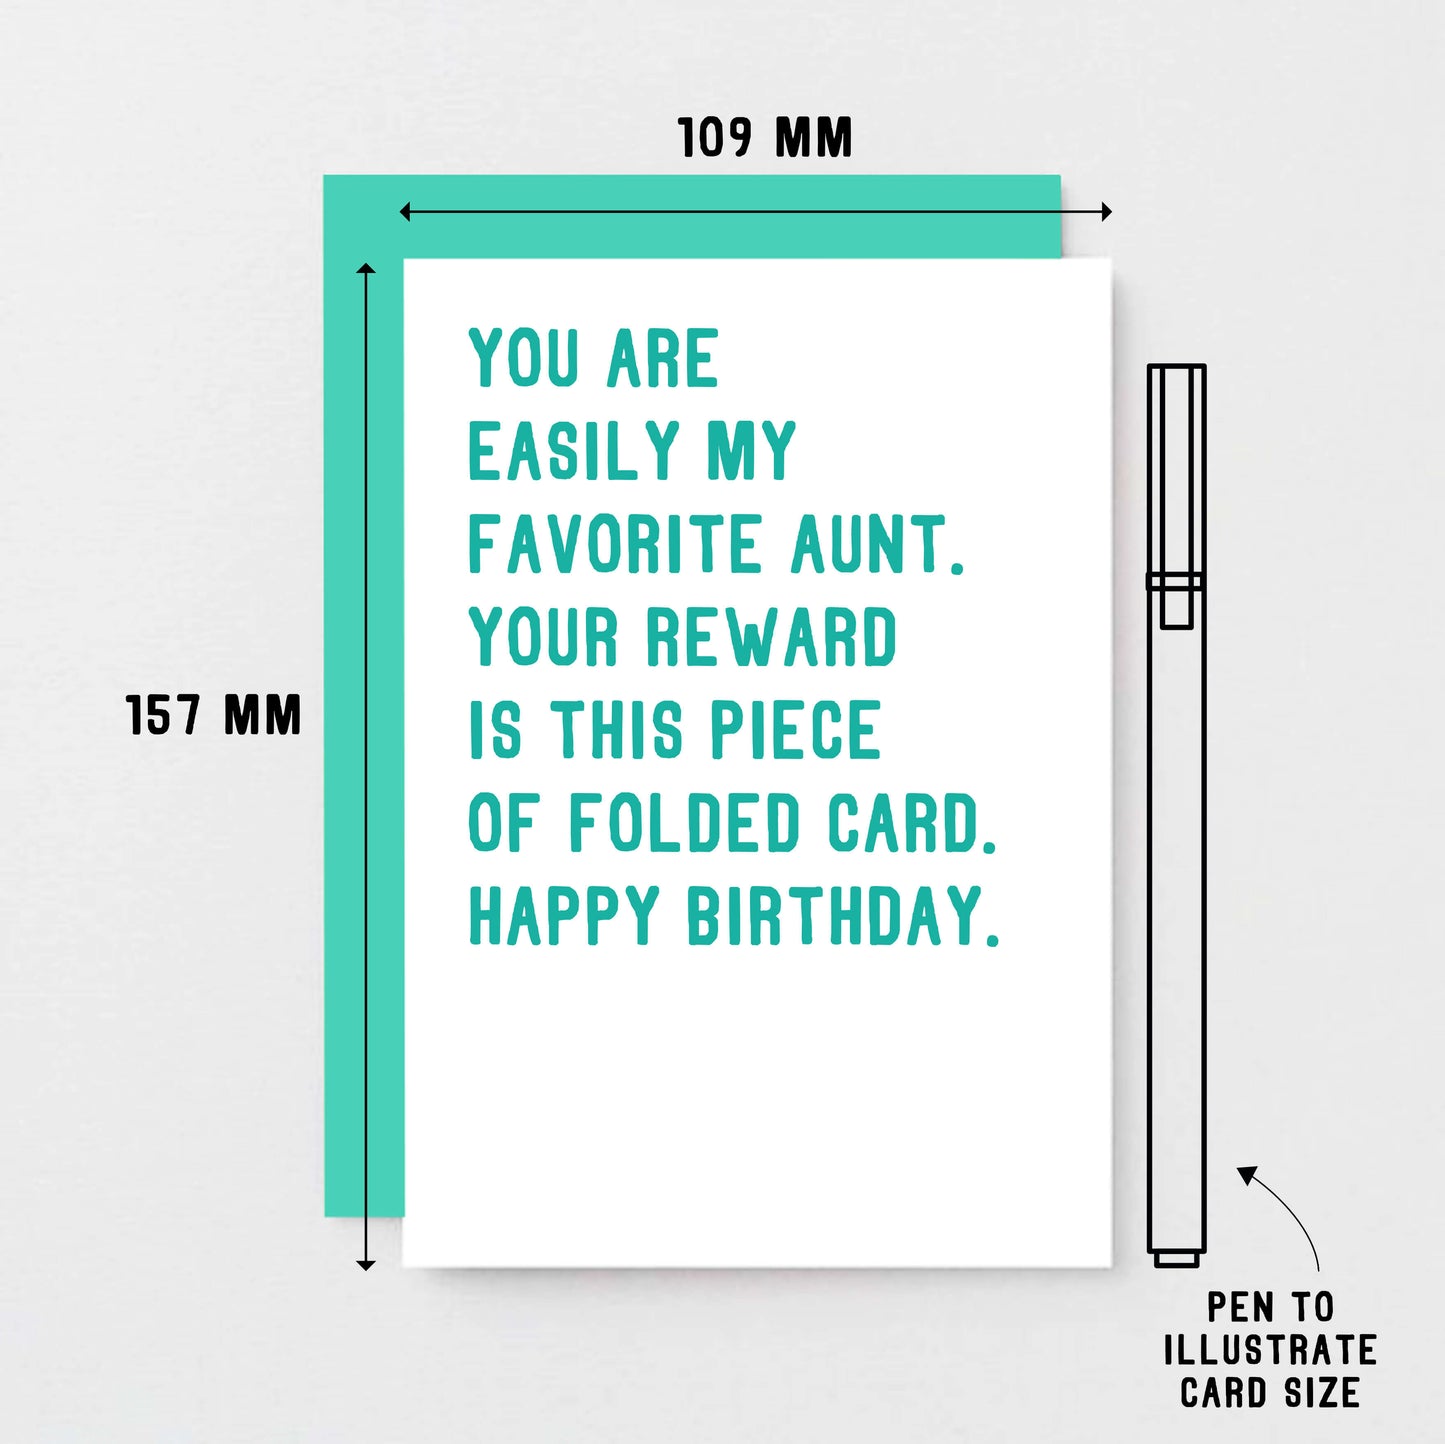 Aunt Birthday Card by SixElevenCreations. Reads You are easily my favorite aunt. Your reward is this piece of folded card. Happy birthday. Product Code SE2018A6_US